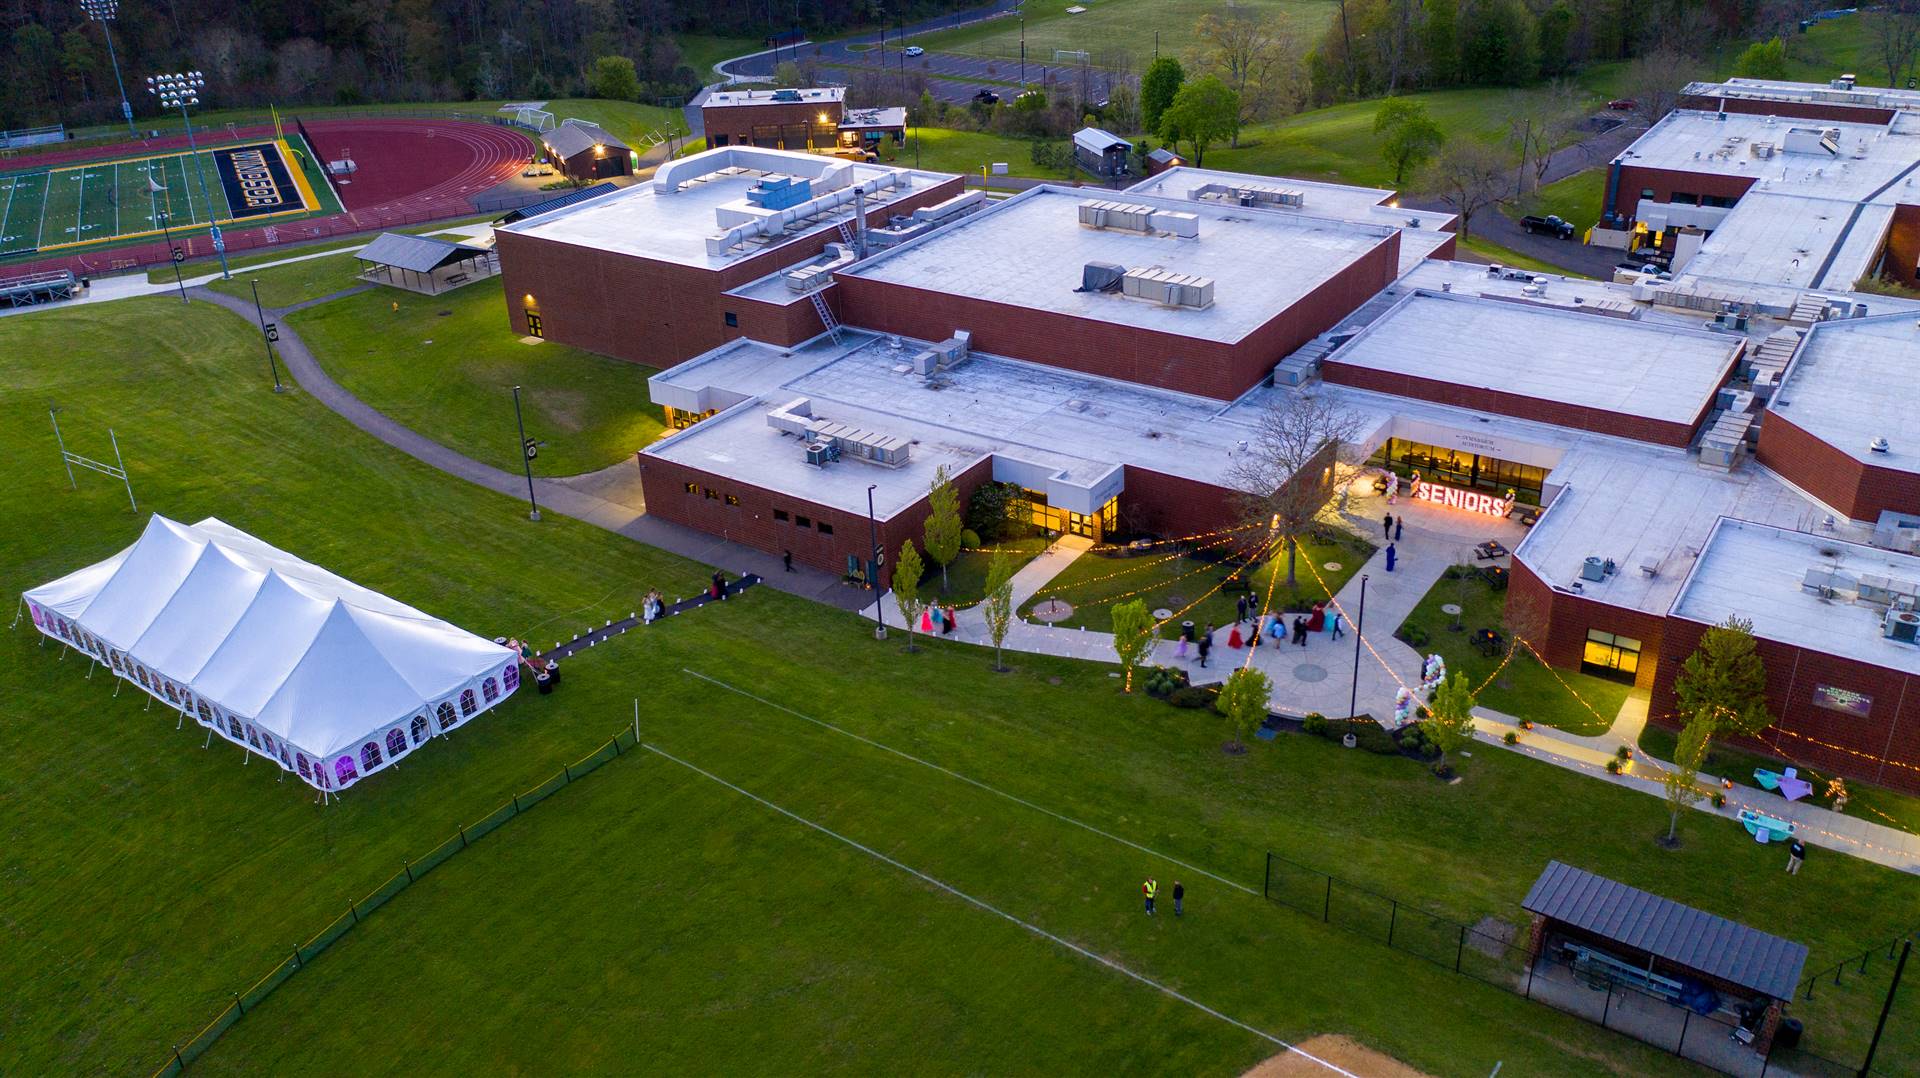 Arial view of WCHS building and tent on field